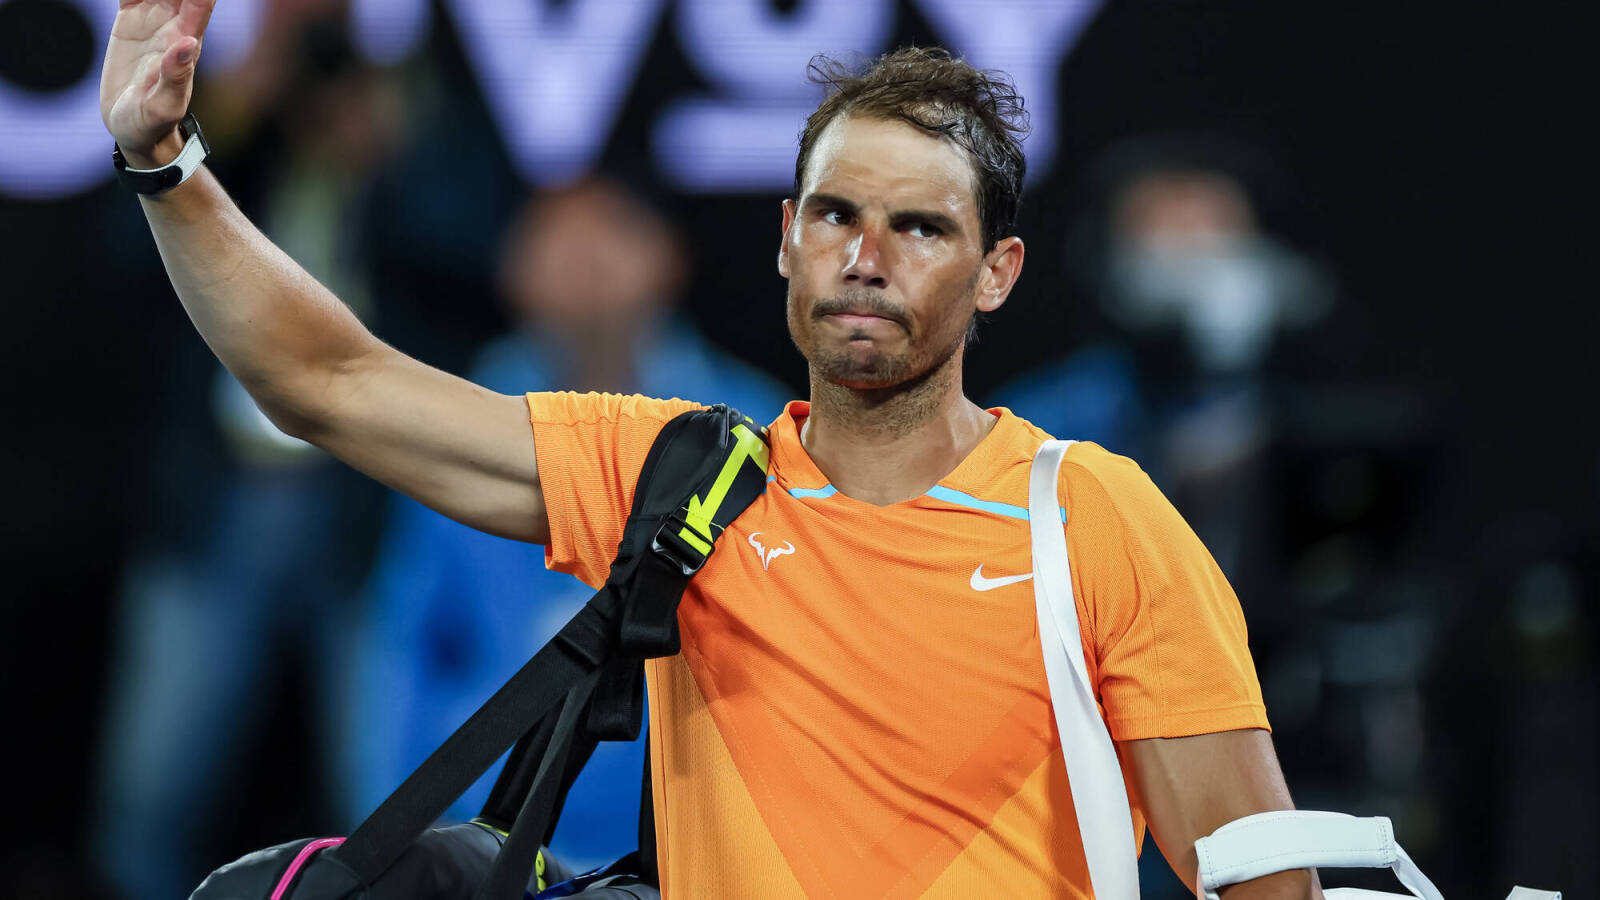 'I think he can progress' Madrid Open director Feliciano Lopez gave an insightful review of Rafael Nadal’s tennis over the last week